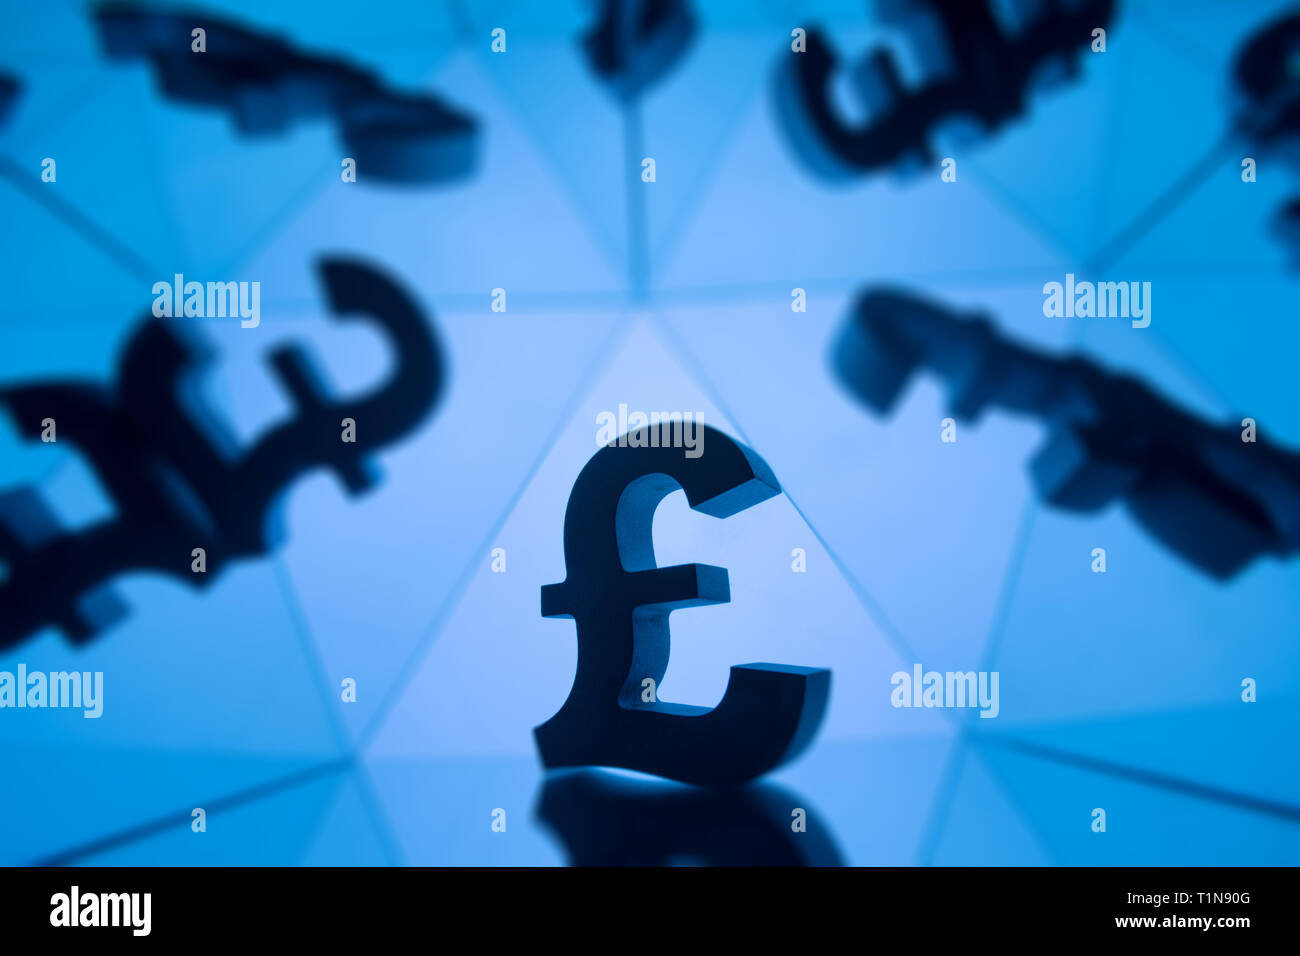 British Pound Sterling Currency Symbol With Many Mirroring Images of Itself on Blue Background Stock Photo